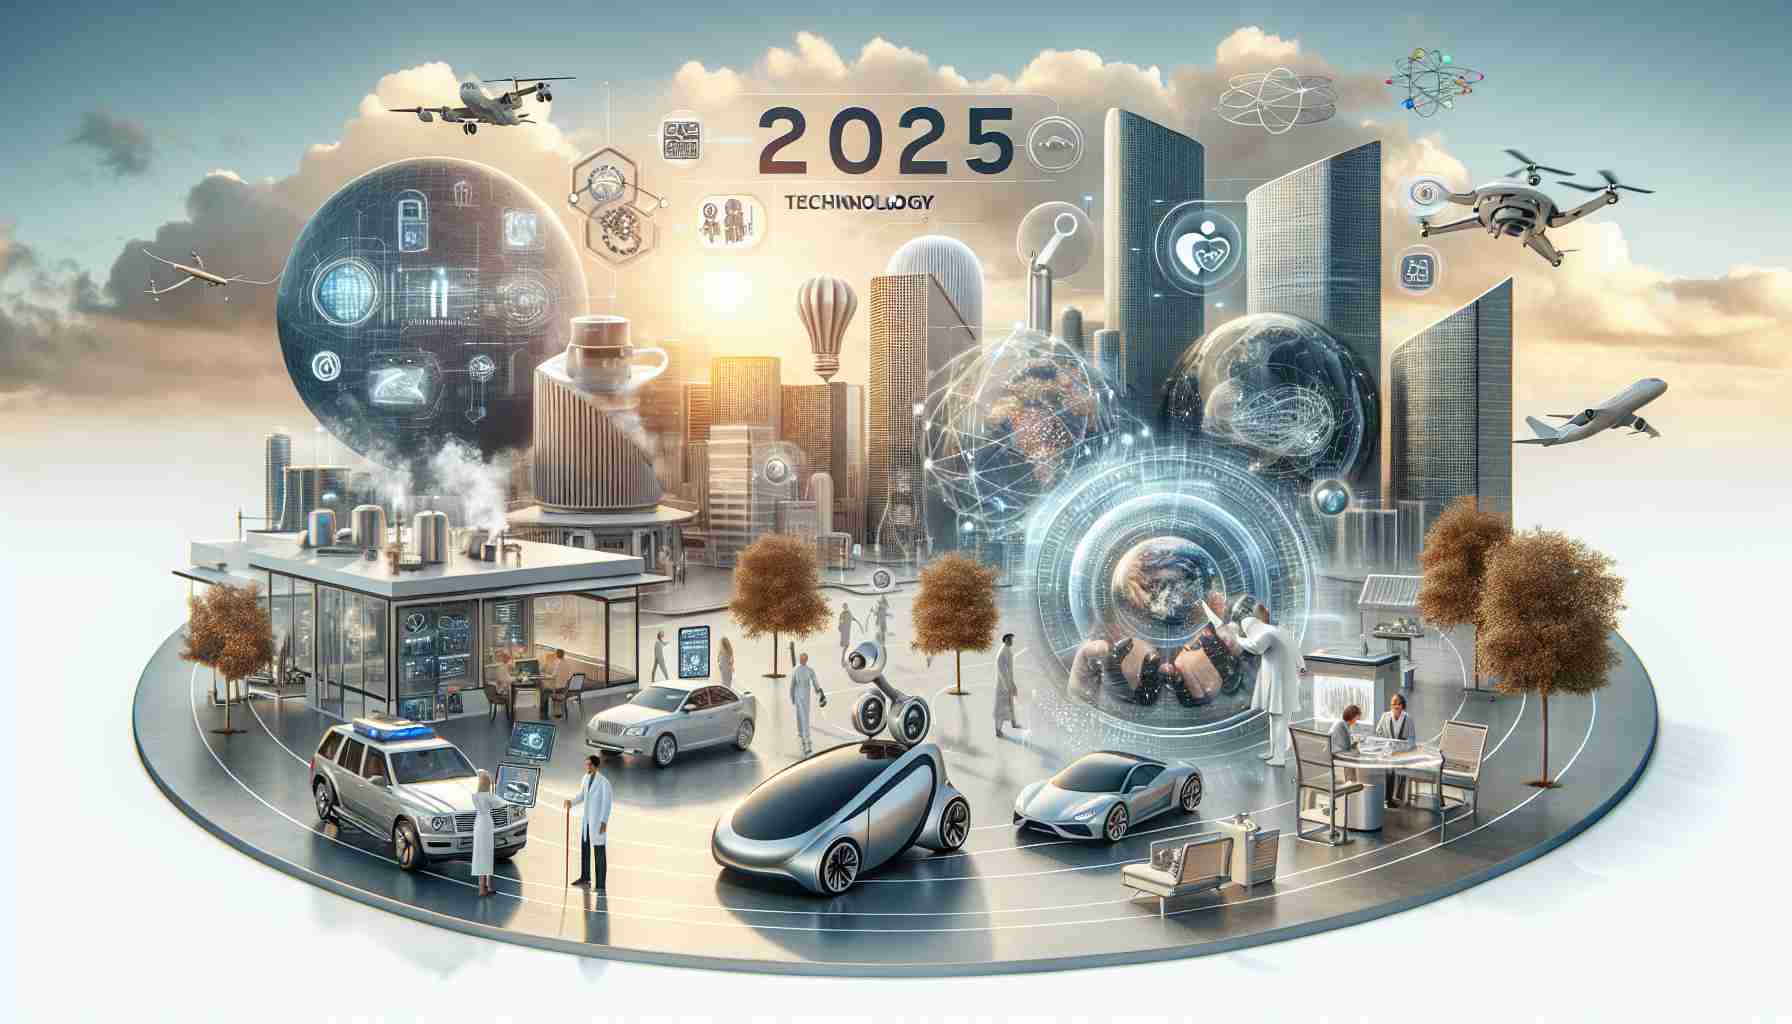 the Technological site in 2025